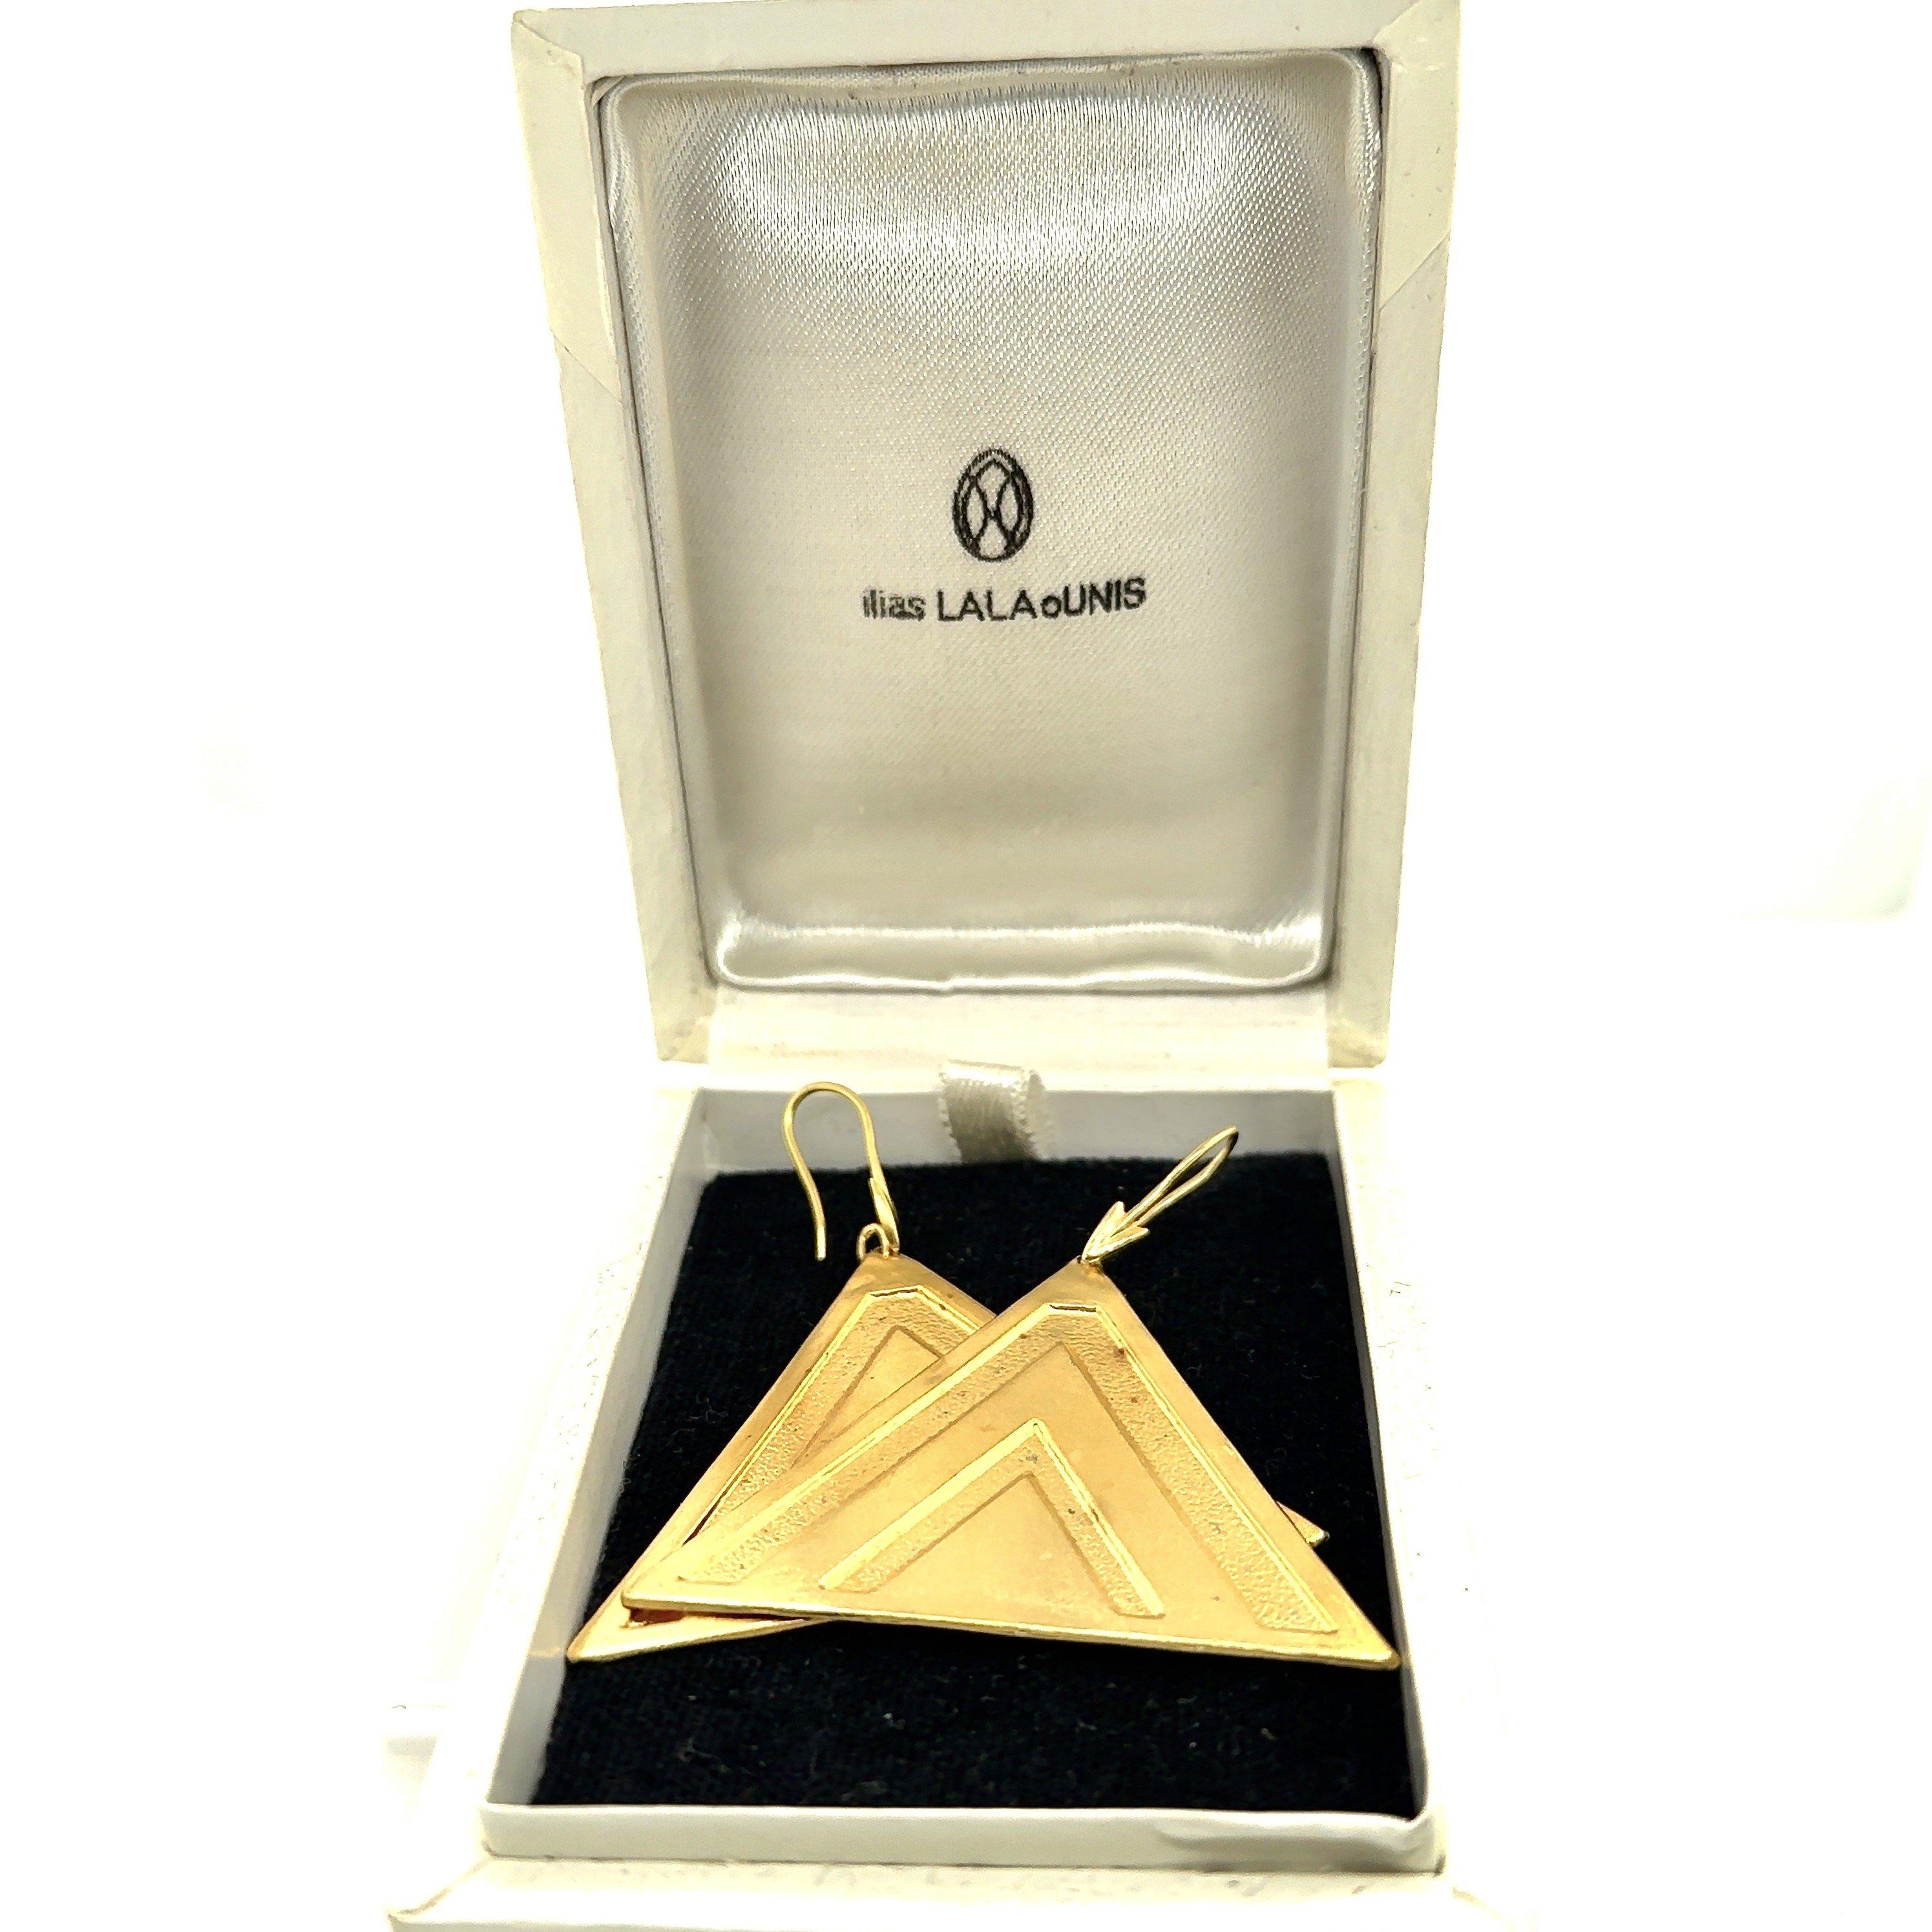 These Ilias Lalaounis Greece textured triangle dangle earrings are made of 18KT yellow gold. The triangles measure approximately 2